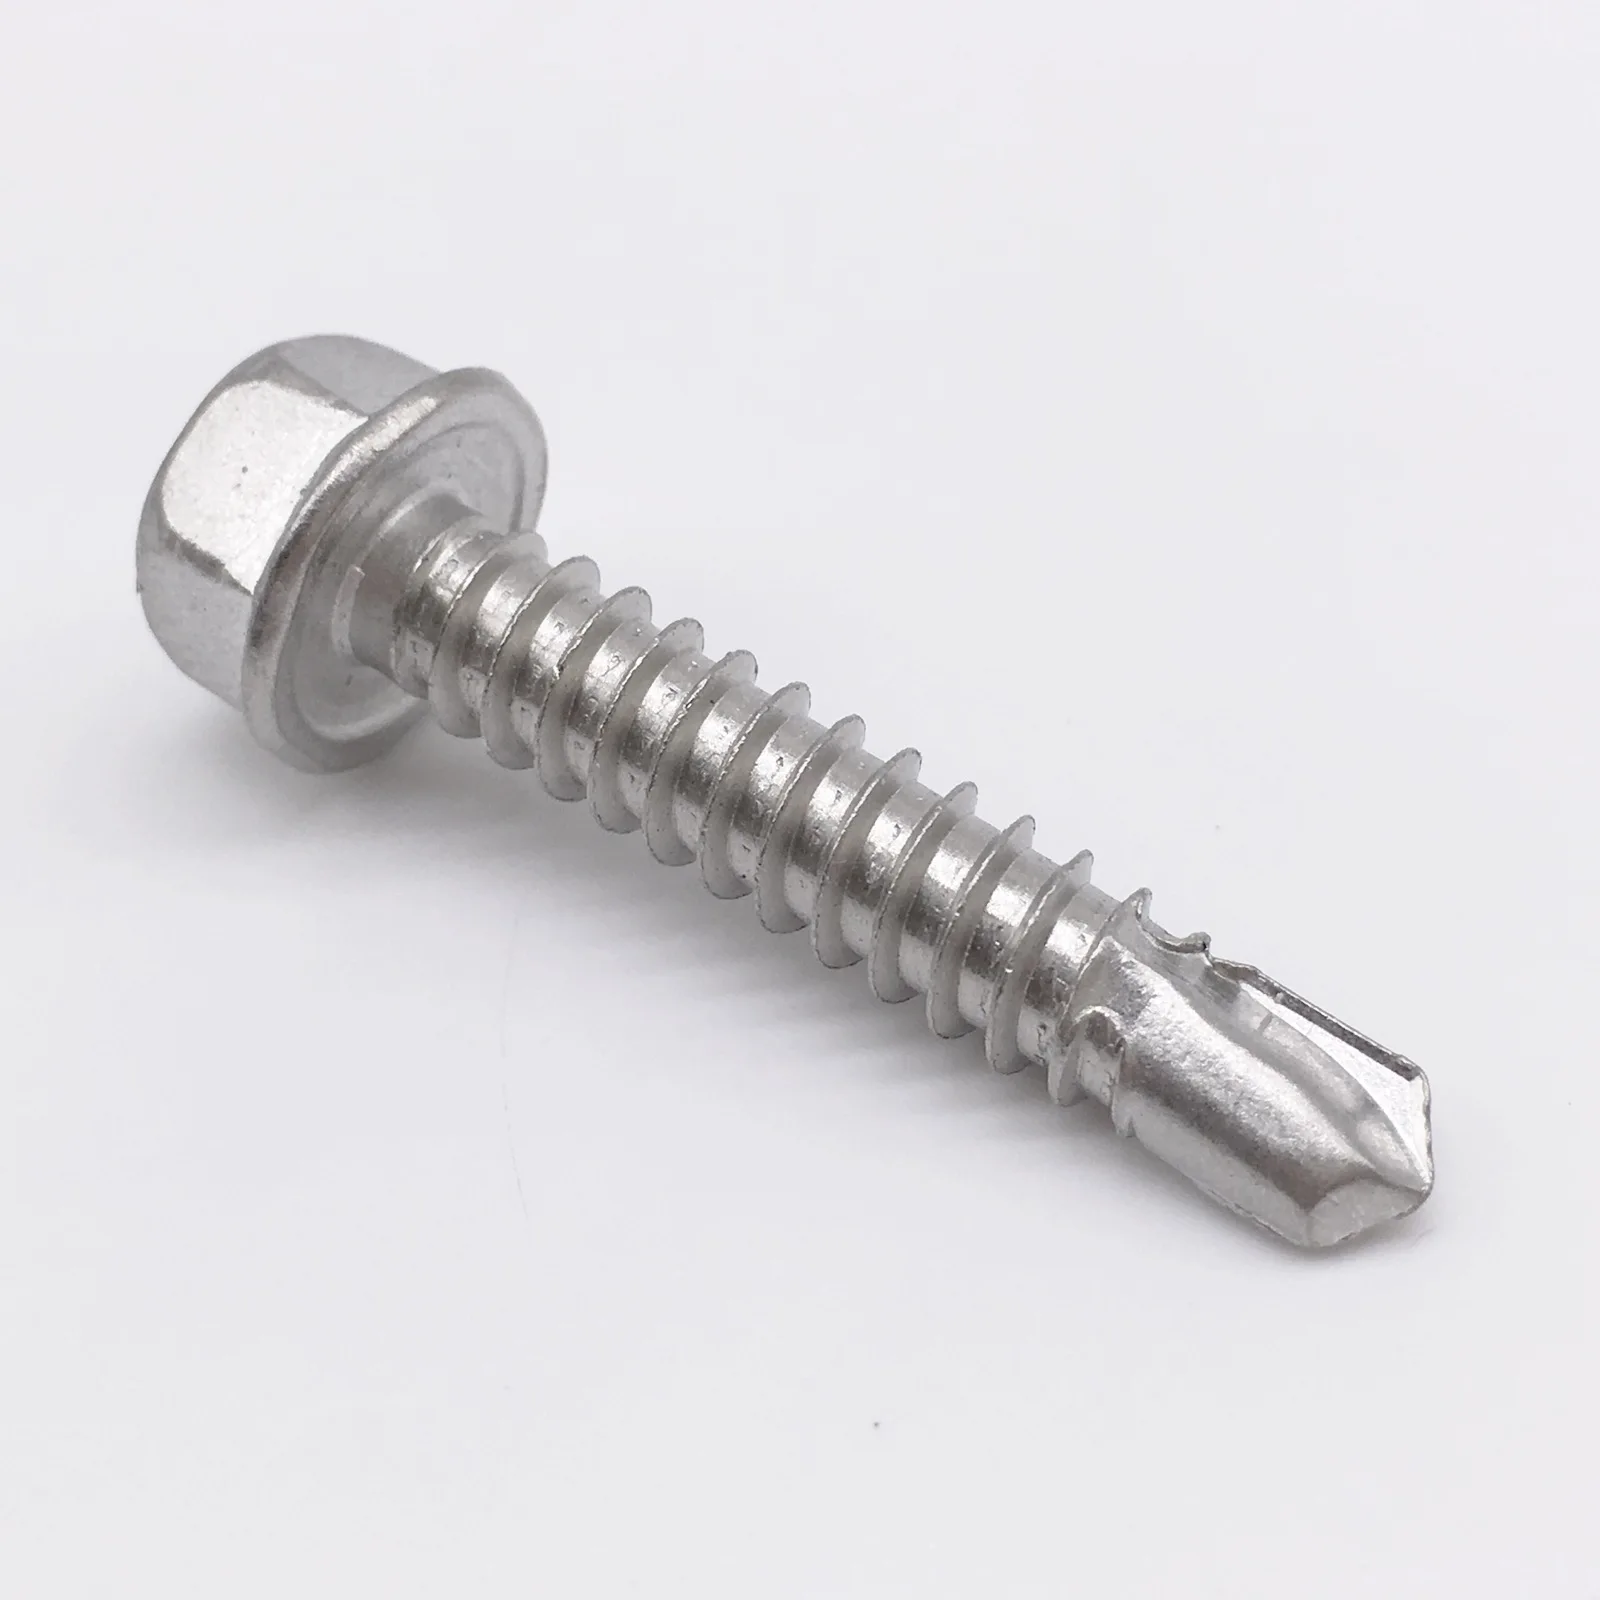 Tek Screws 22,45,55,75,90mm Self Drilling Tapping Roofing Sheets Fixings Washers 